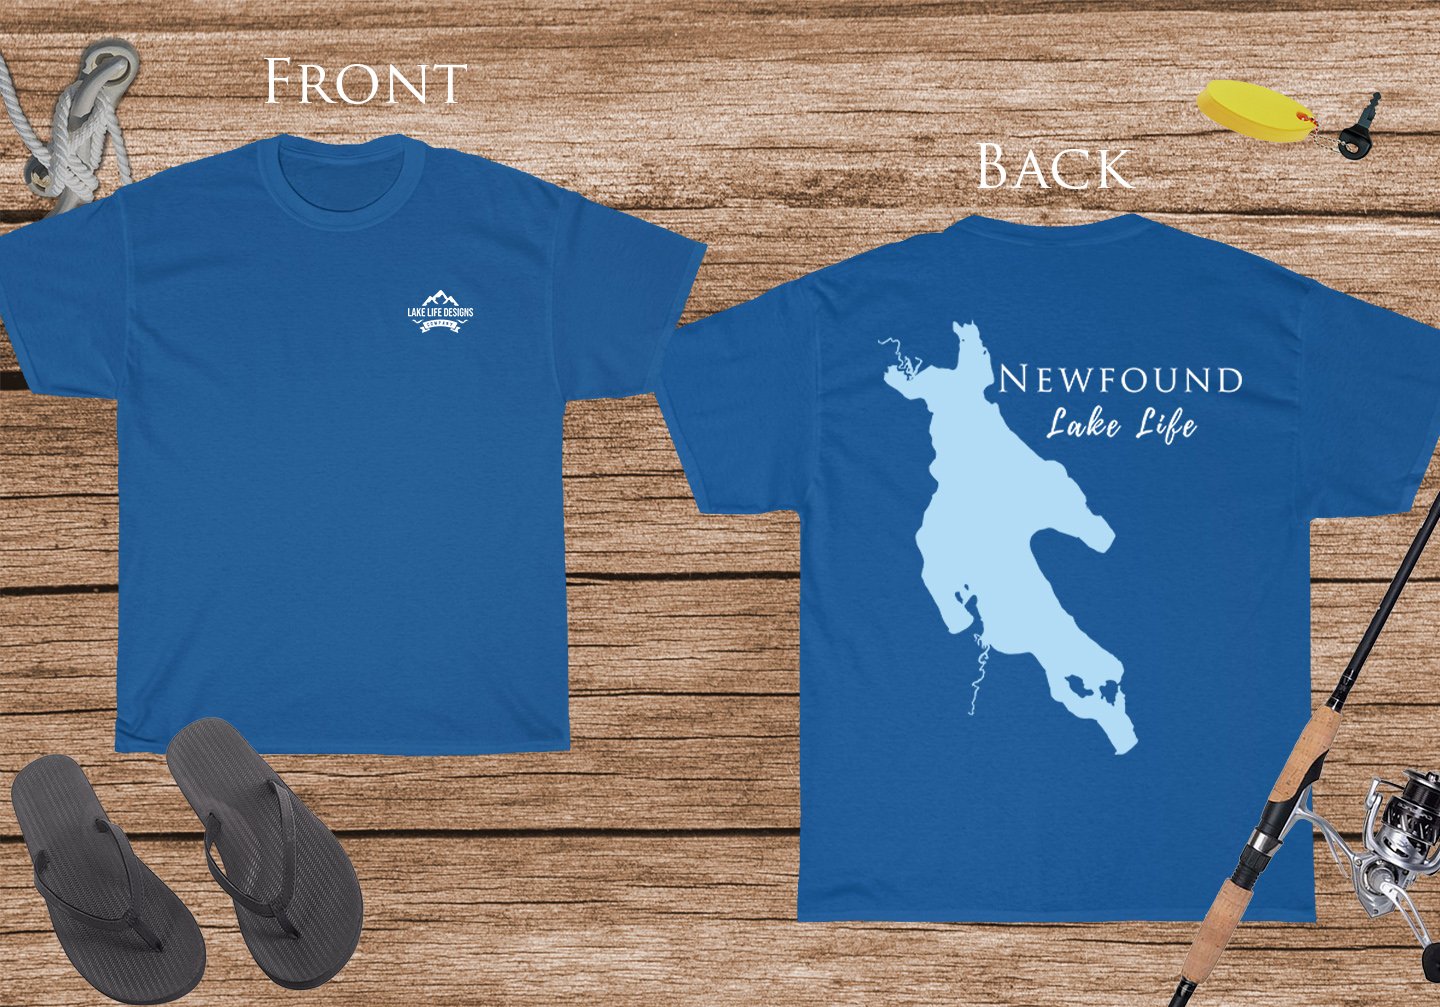 Newfound Lake Life - Cotton Short Sleeved - FRONT & BACK PRINTED - Short Sleeved Cotton Tee - New Hampshire Lake